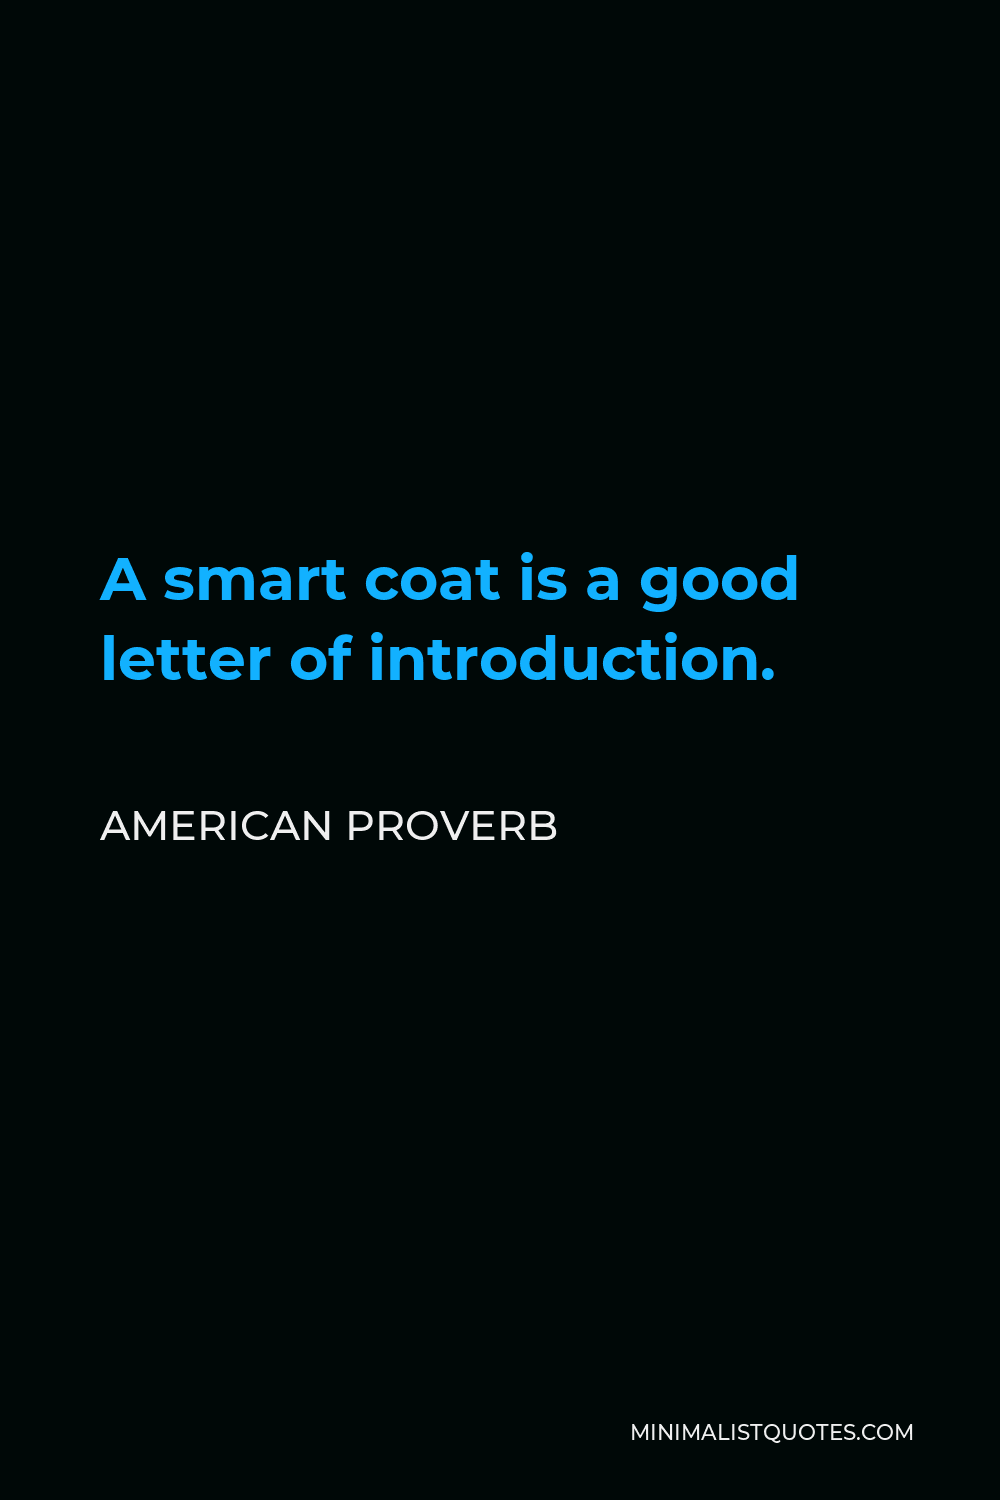 American Proverb Quote - A smart coat is a good letter of introduction.